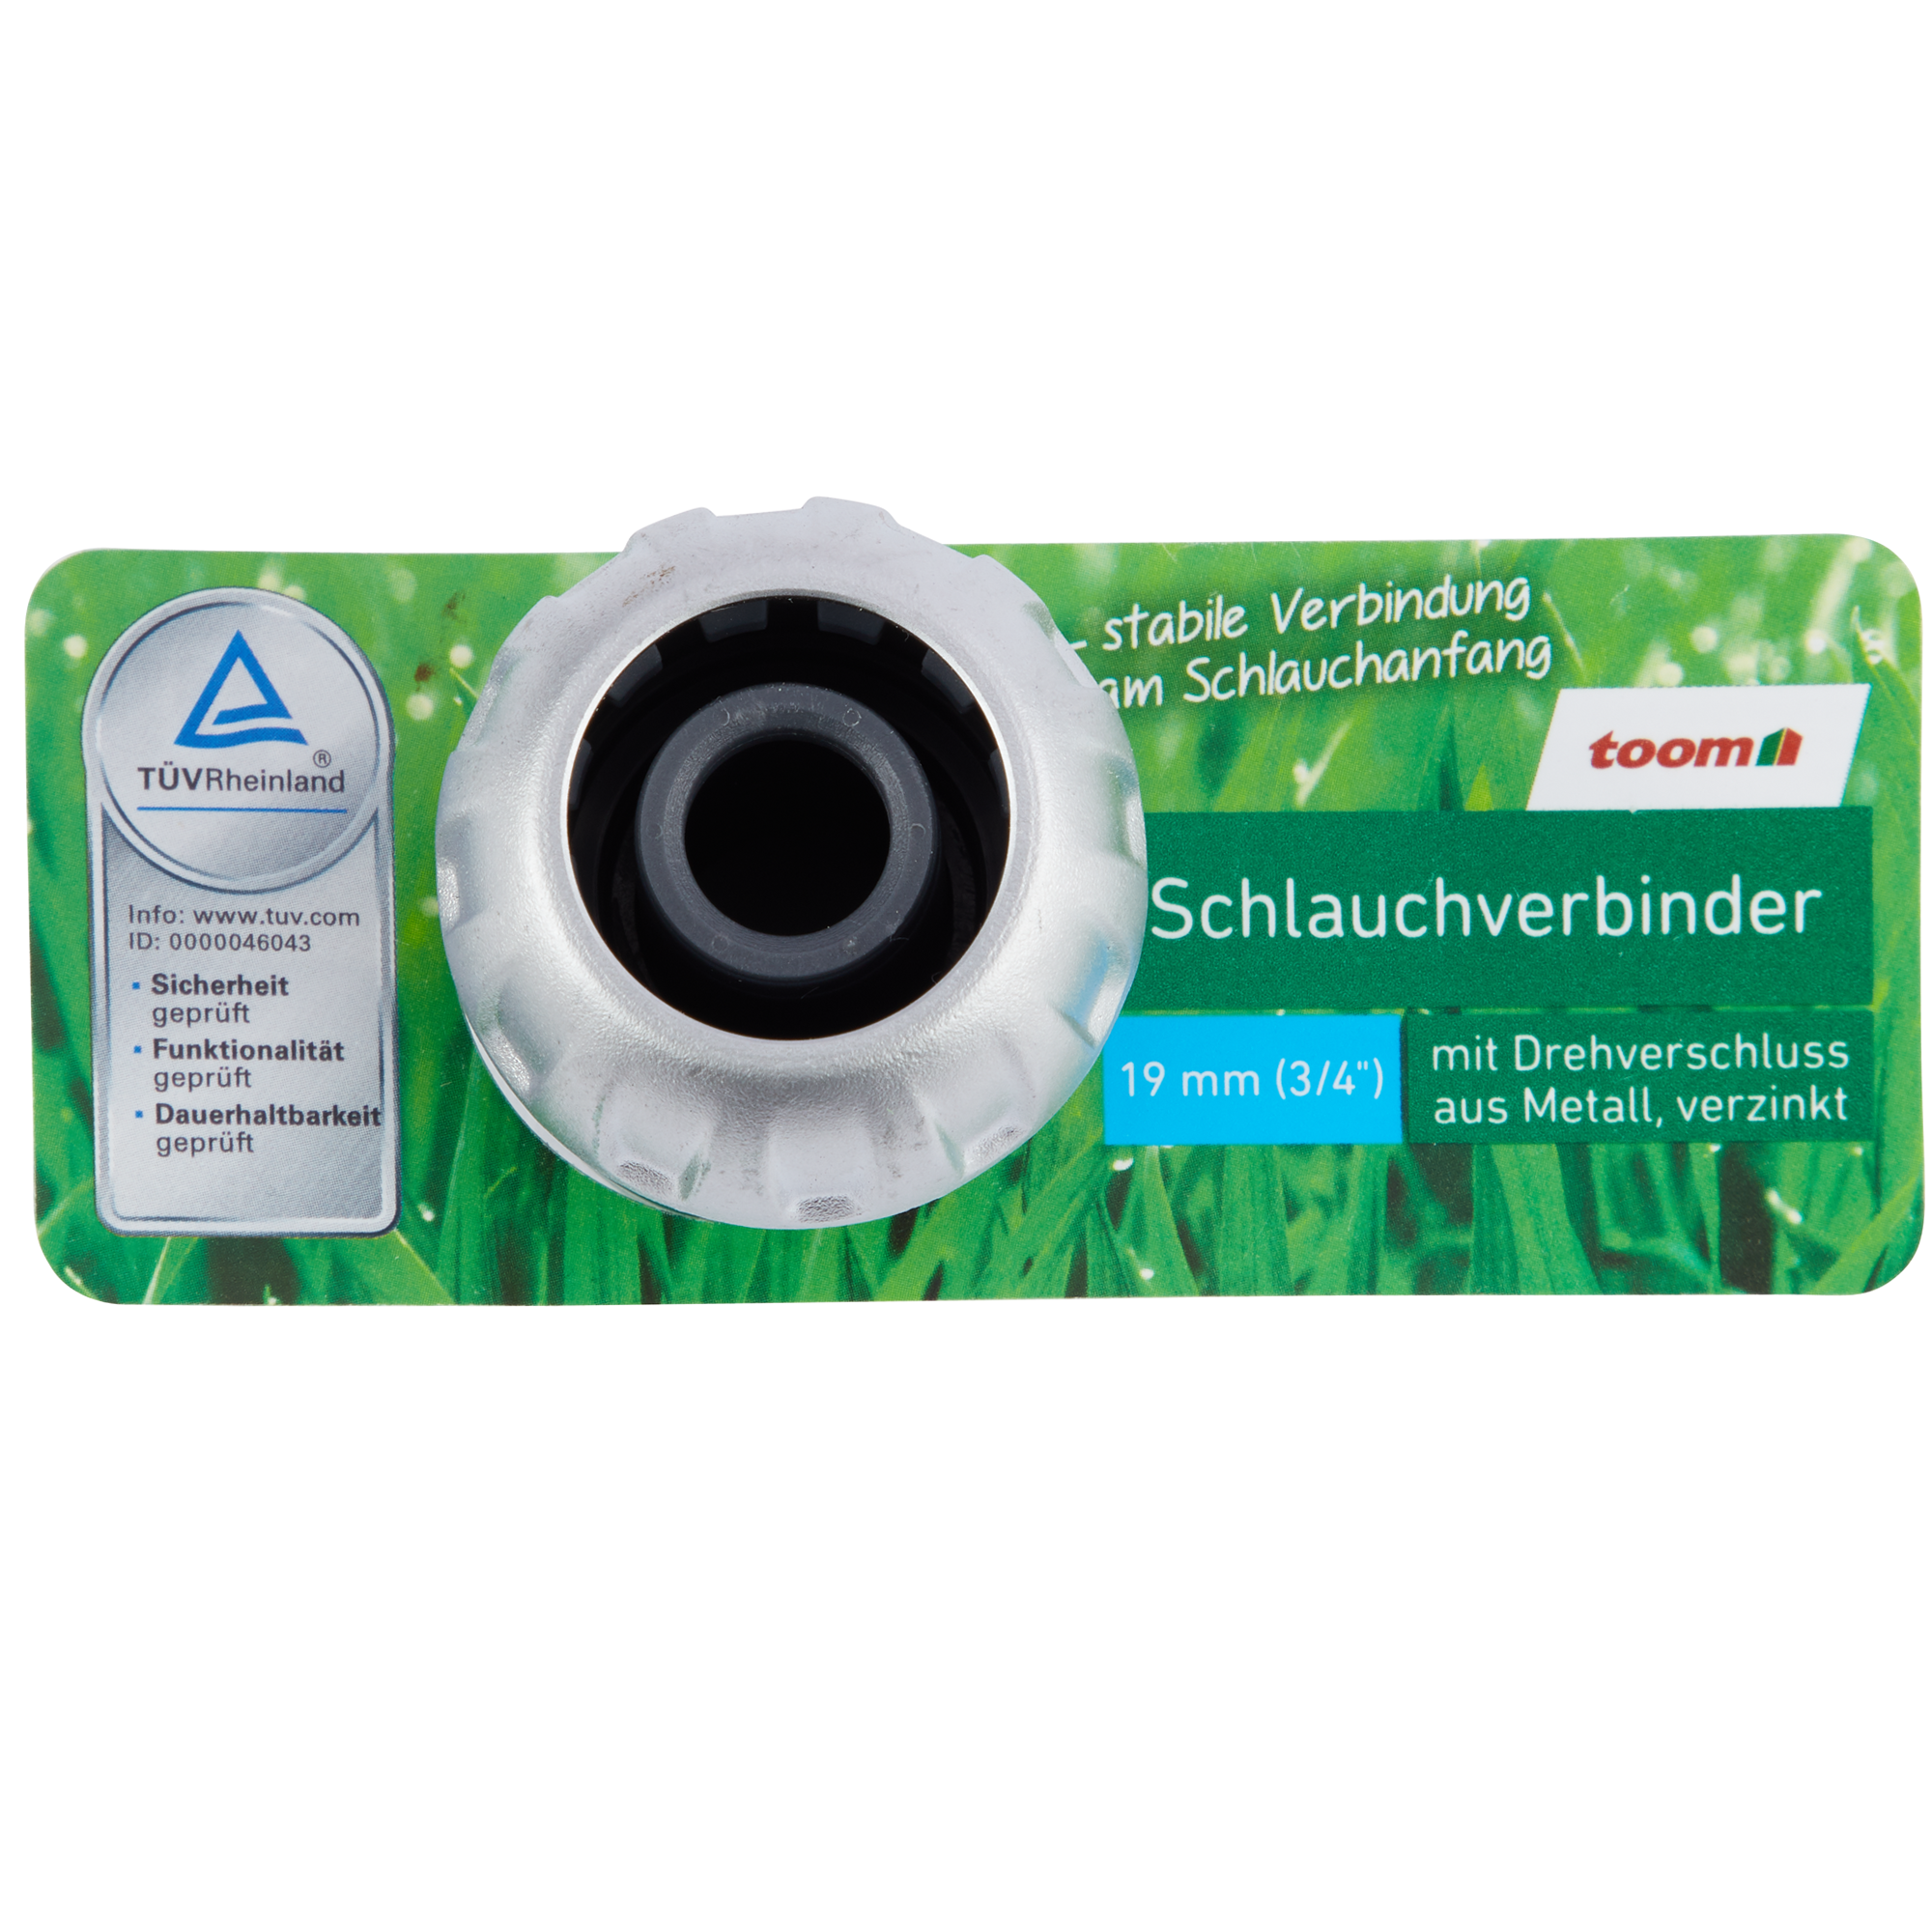 Schlauchverbinder 19 mm + product picture